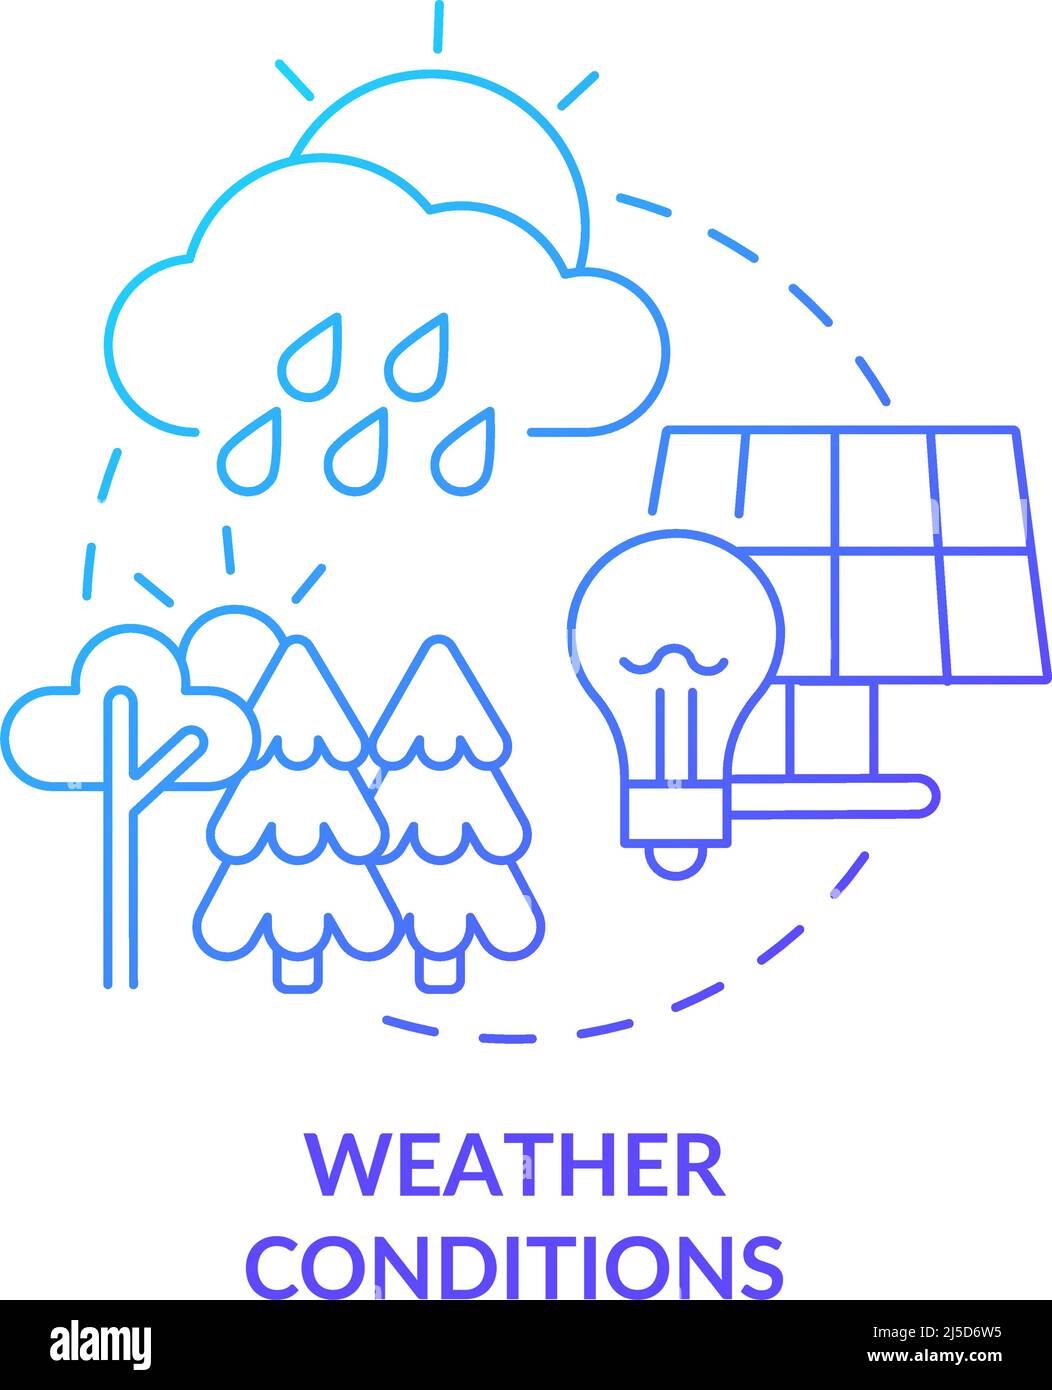 Weather conditions blue gradient concept icon Stock Vector